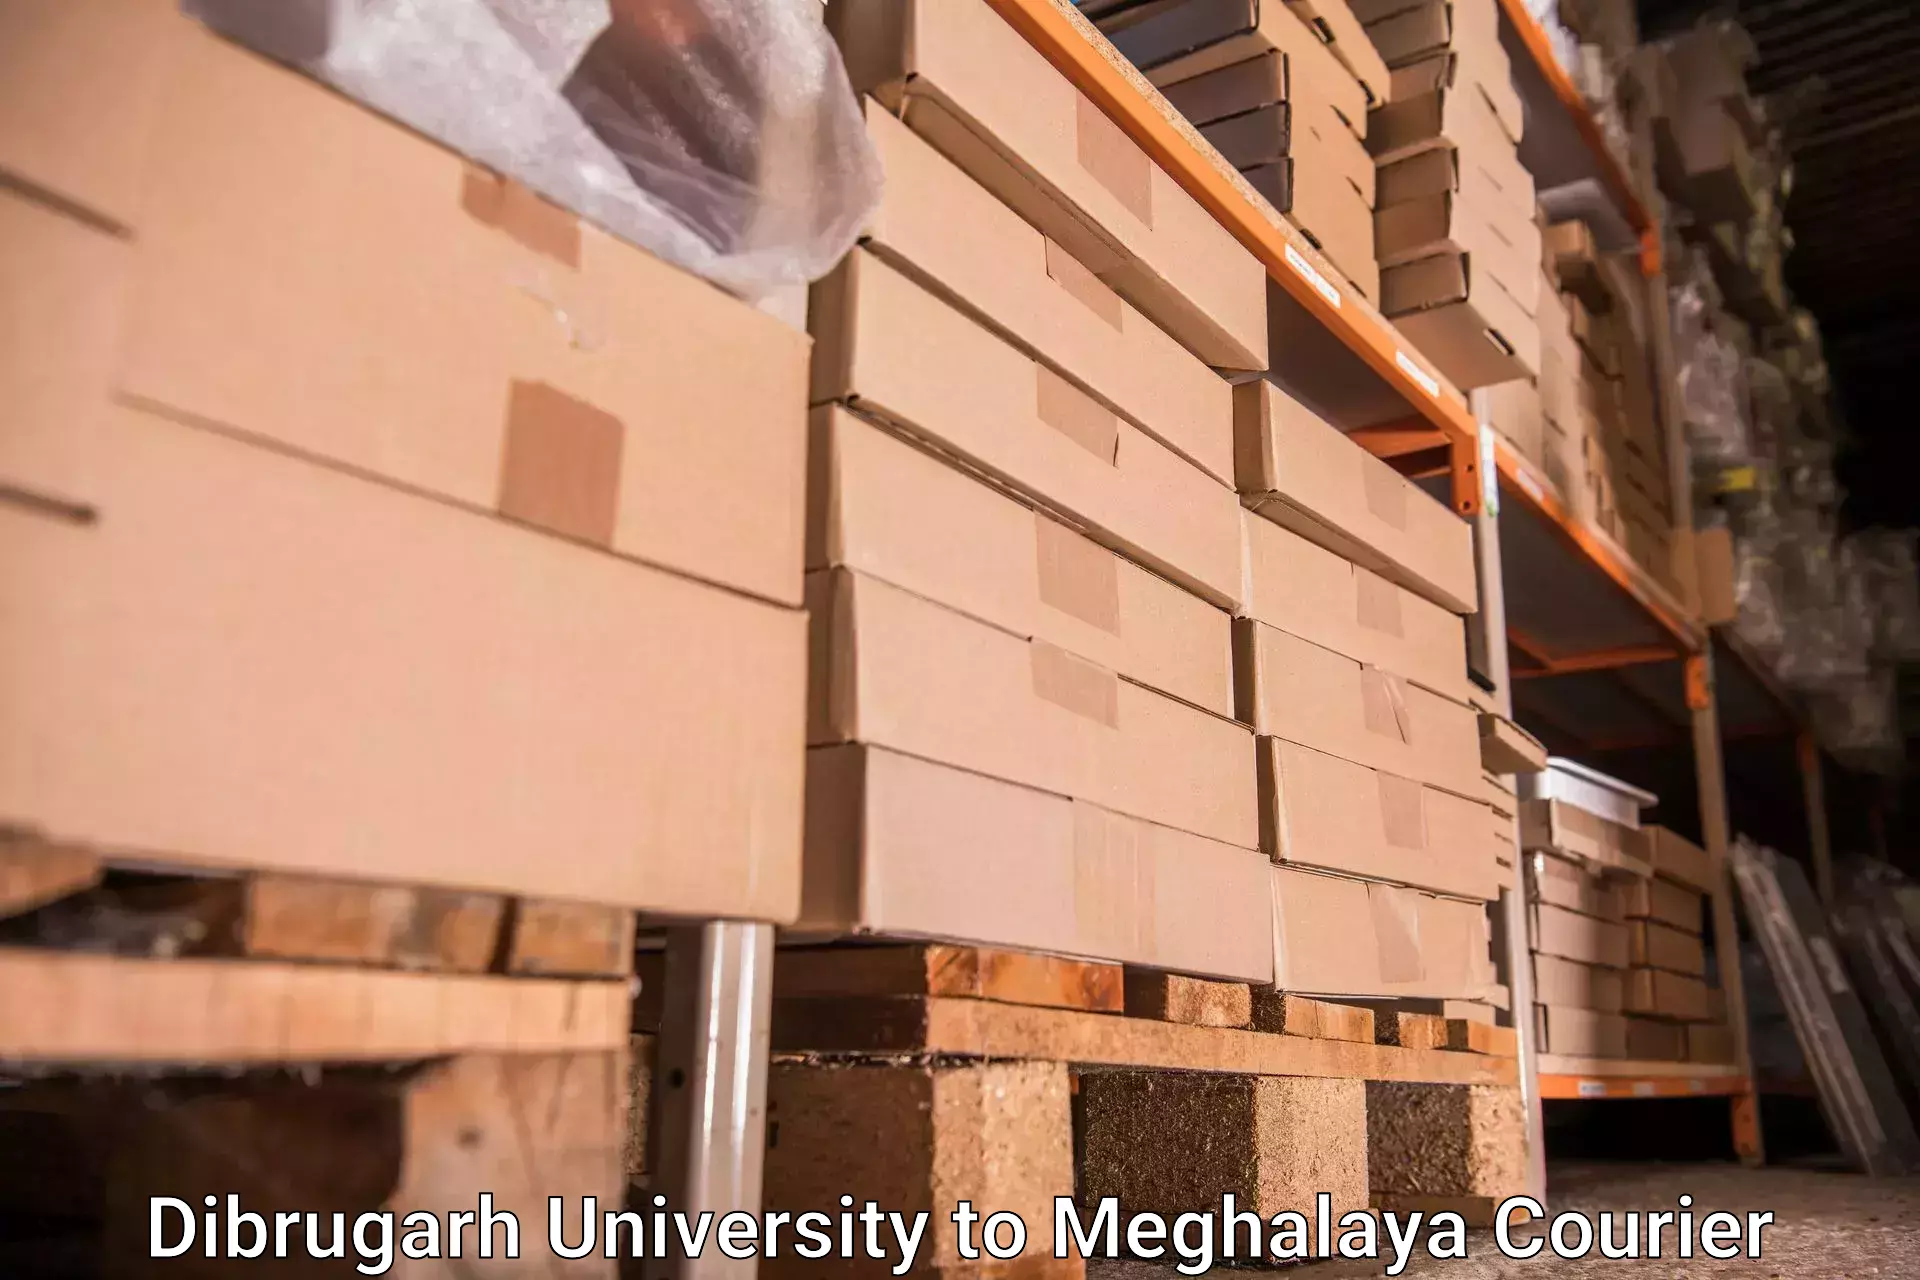 Luggage transport deals in Dibrugarh University to Shillong